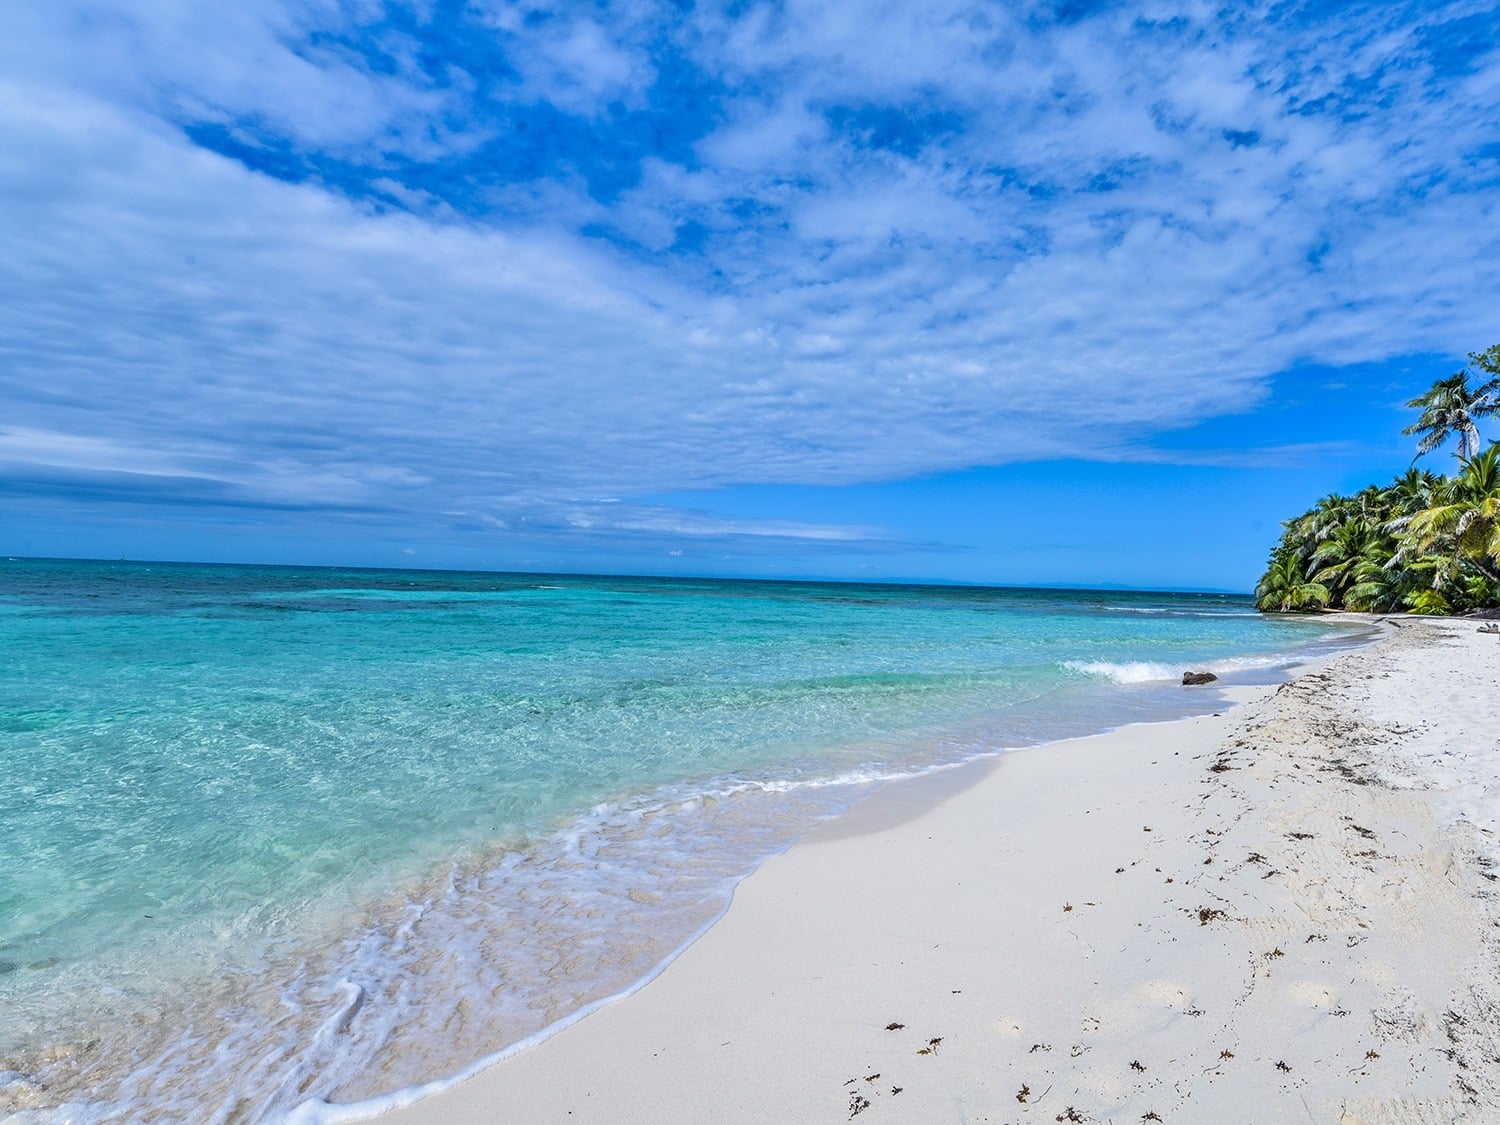 Ranguana Caye is one of the most beautiful beaches in Belize.